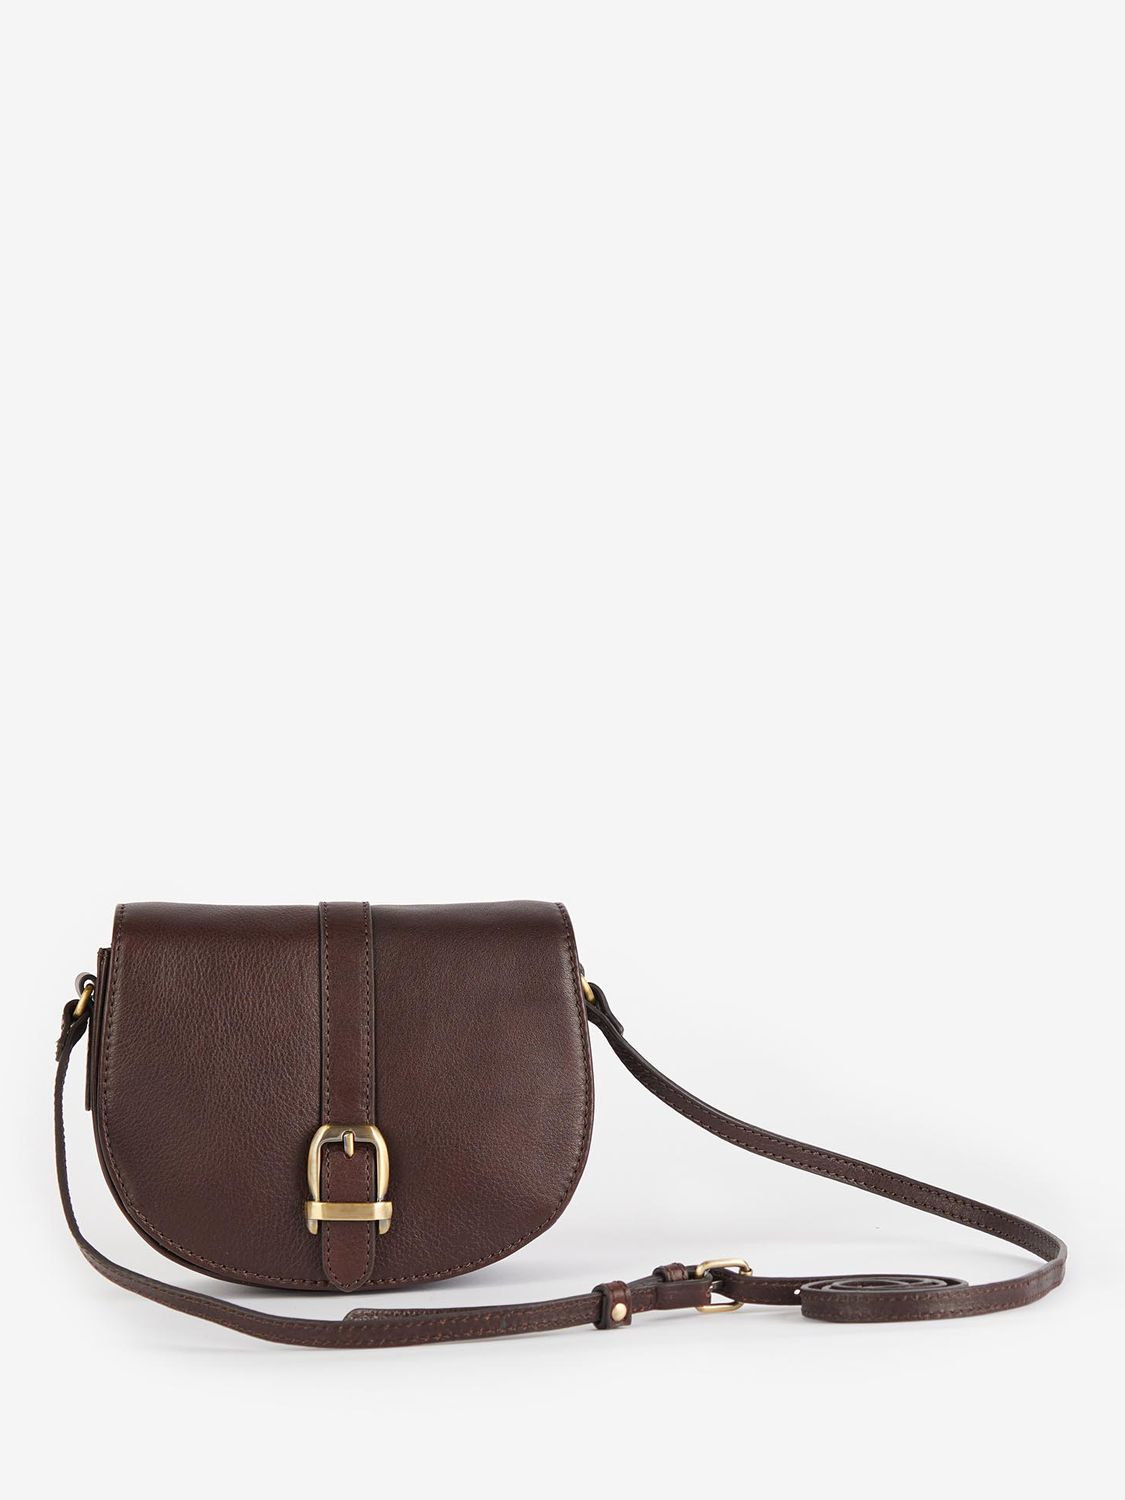 Barbour Laire Leather Saddle Bag, Dark Brown at John Lewis & Partners